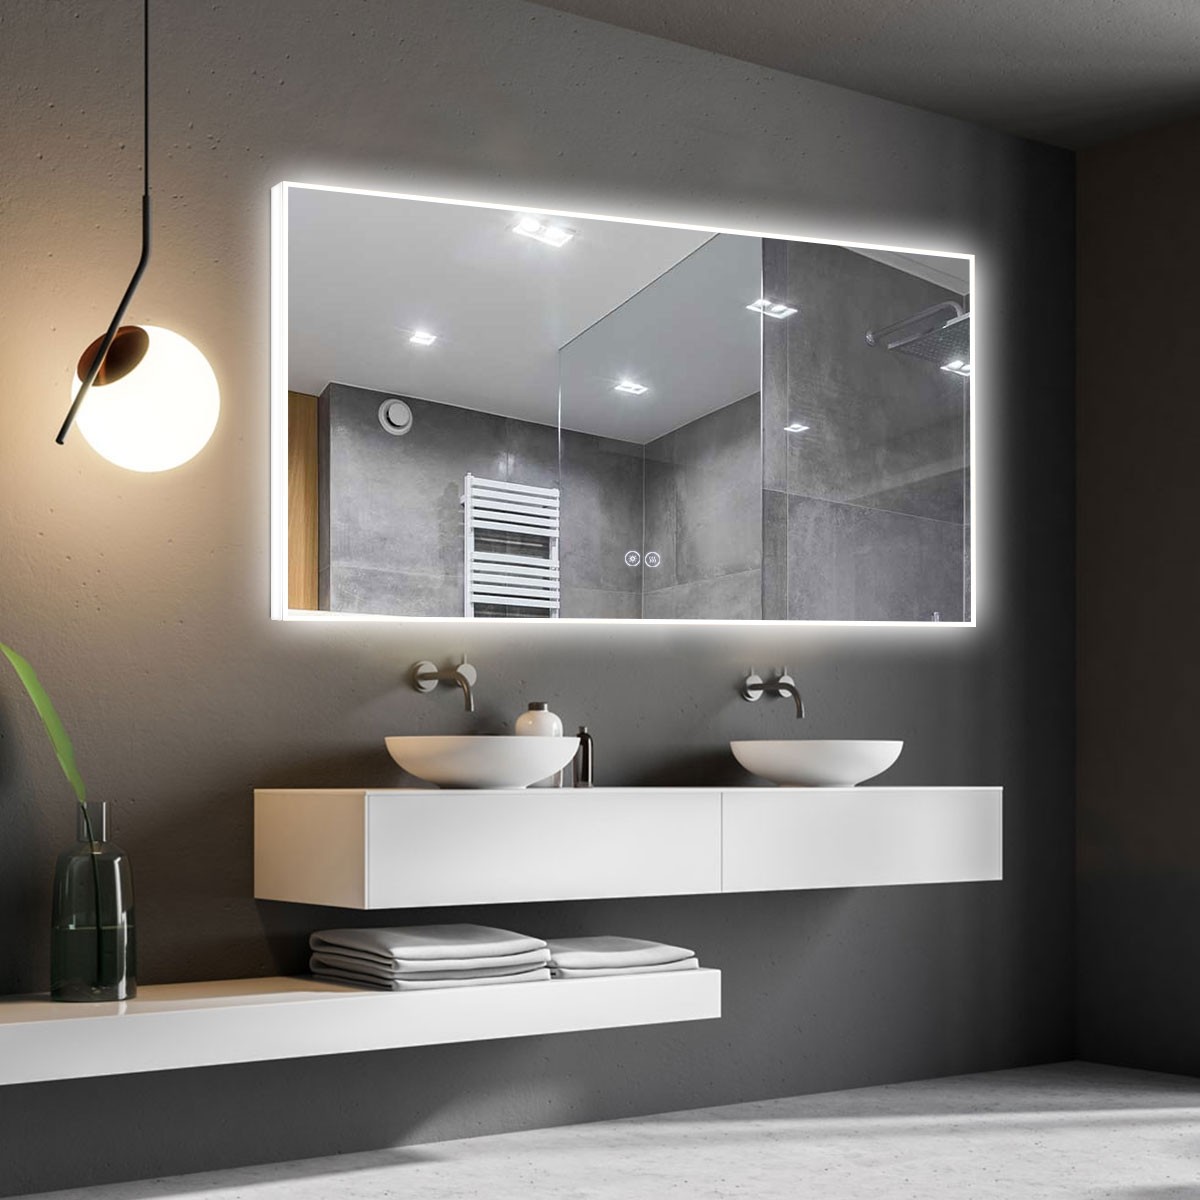 DECORAPORT 55 x 36 Inch LED Bathroom Mirror with Touch Button,Anti Fog, Dimmable, Bluetooth Speakers, Vertical & Horizontal Mount (D422-5536A)